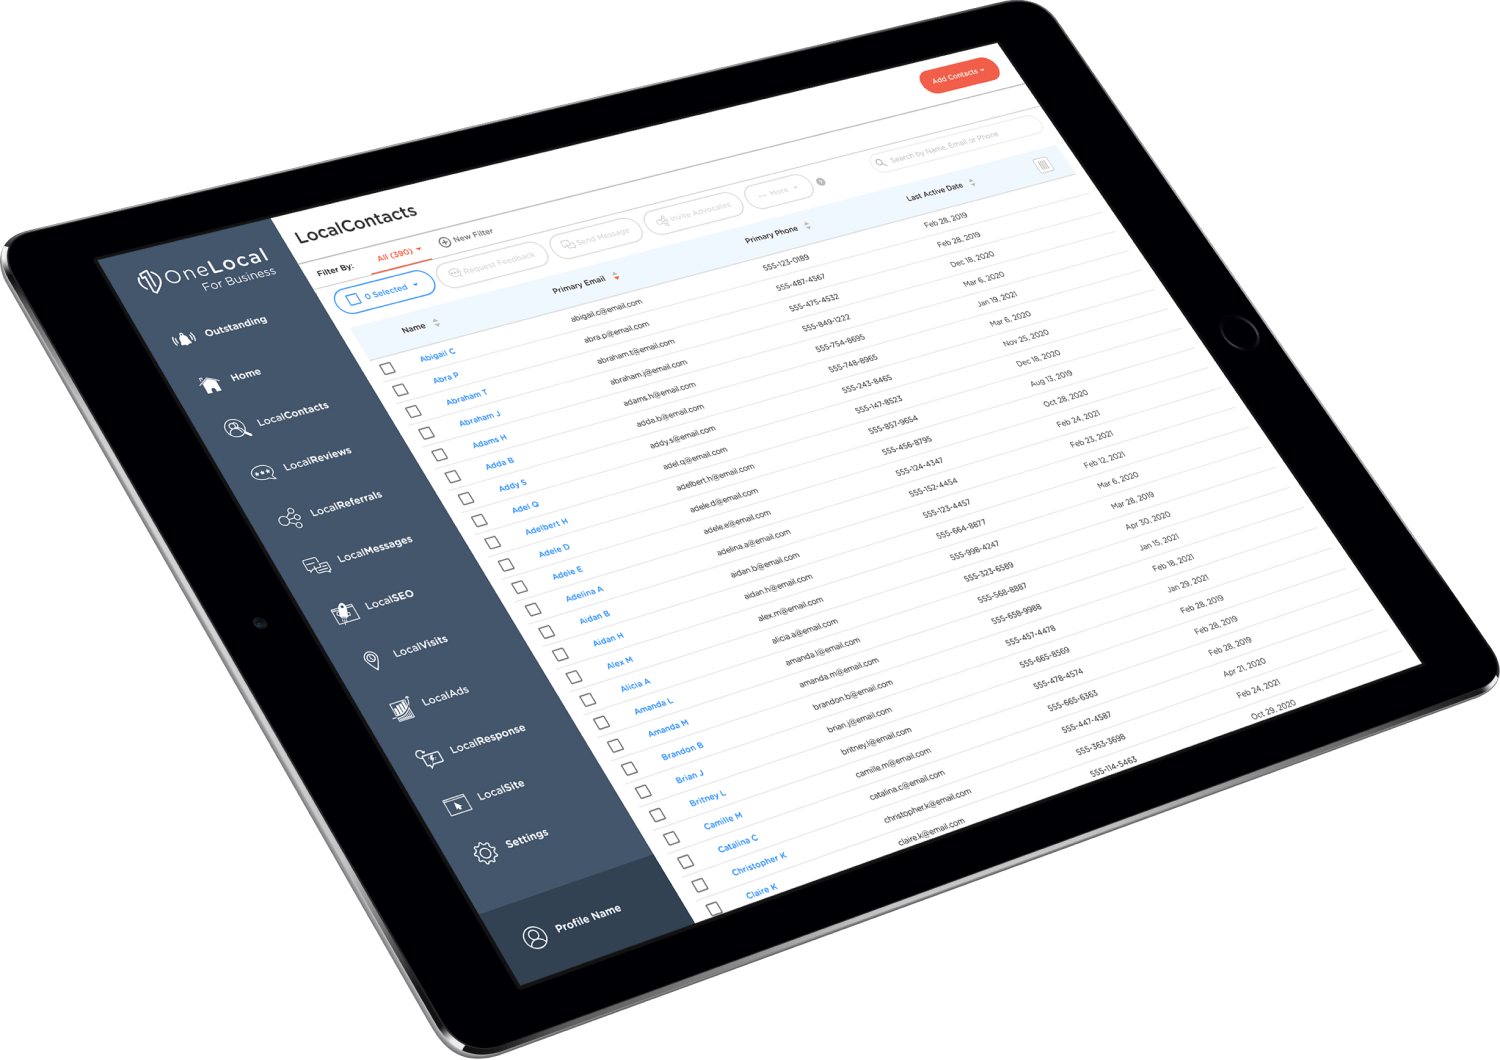 Centralize all of your customer data. We funnel all the customer data you have across multiple channels into one easy-to-read dashboard.